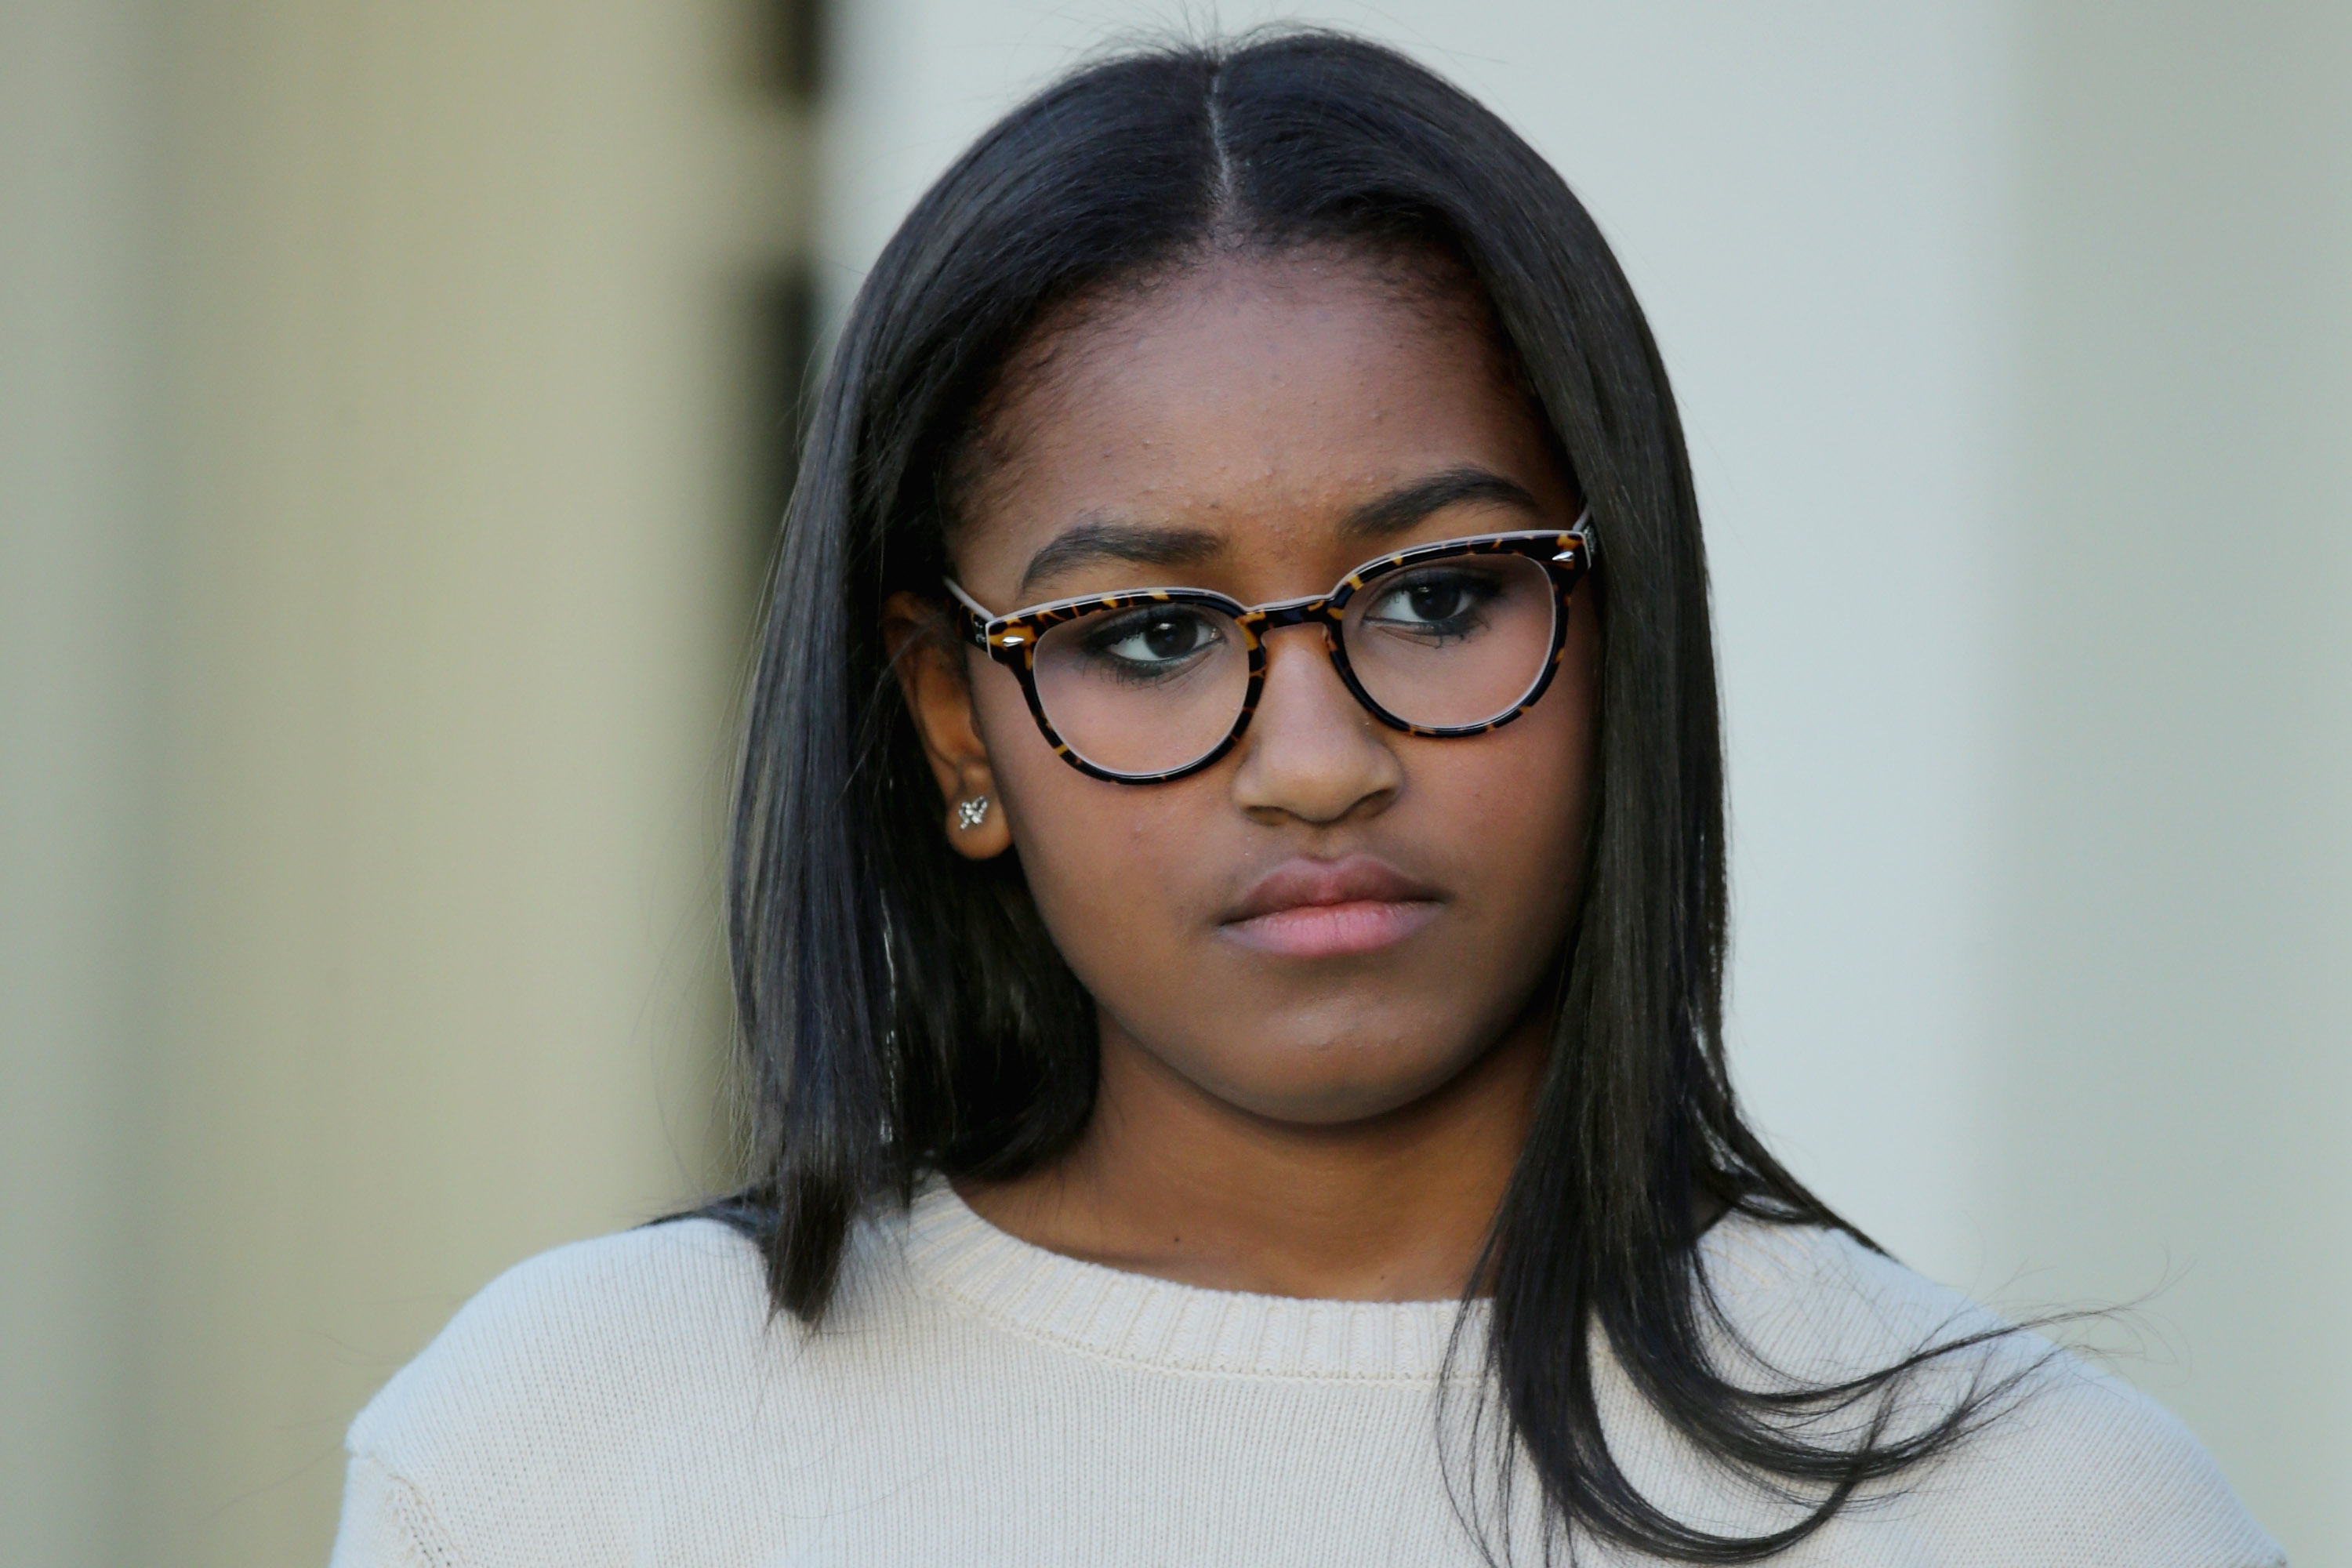 Sasha Obama in the White House in Washington D.C. on November 25, 2015 | Source: Getty Images